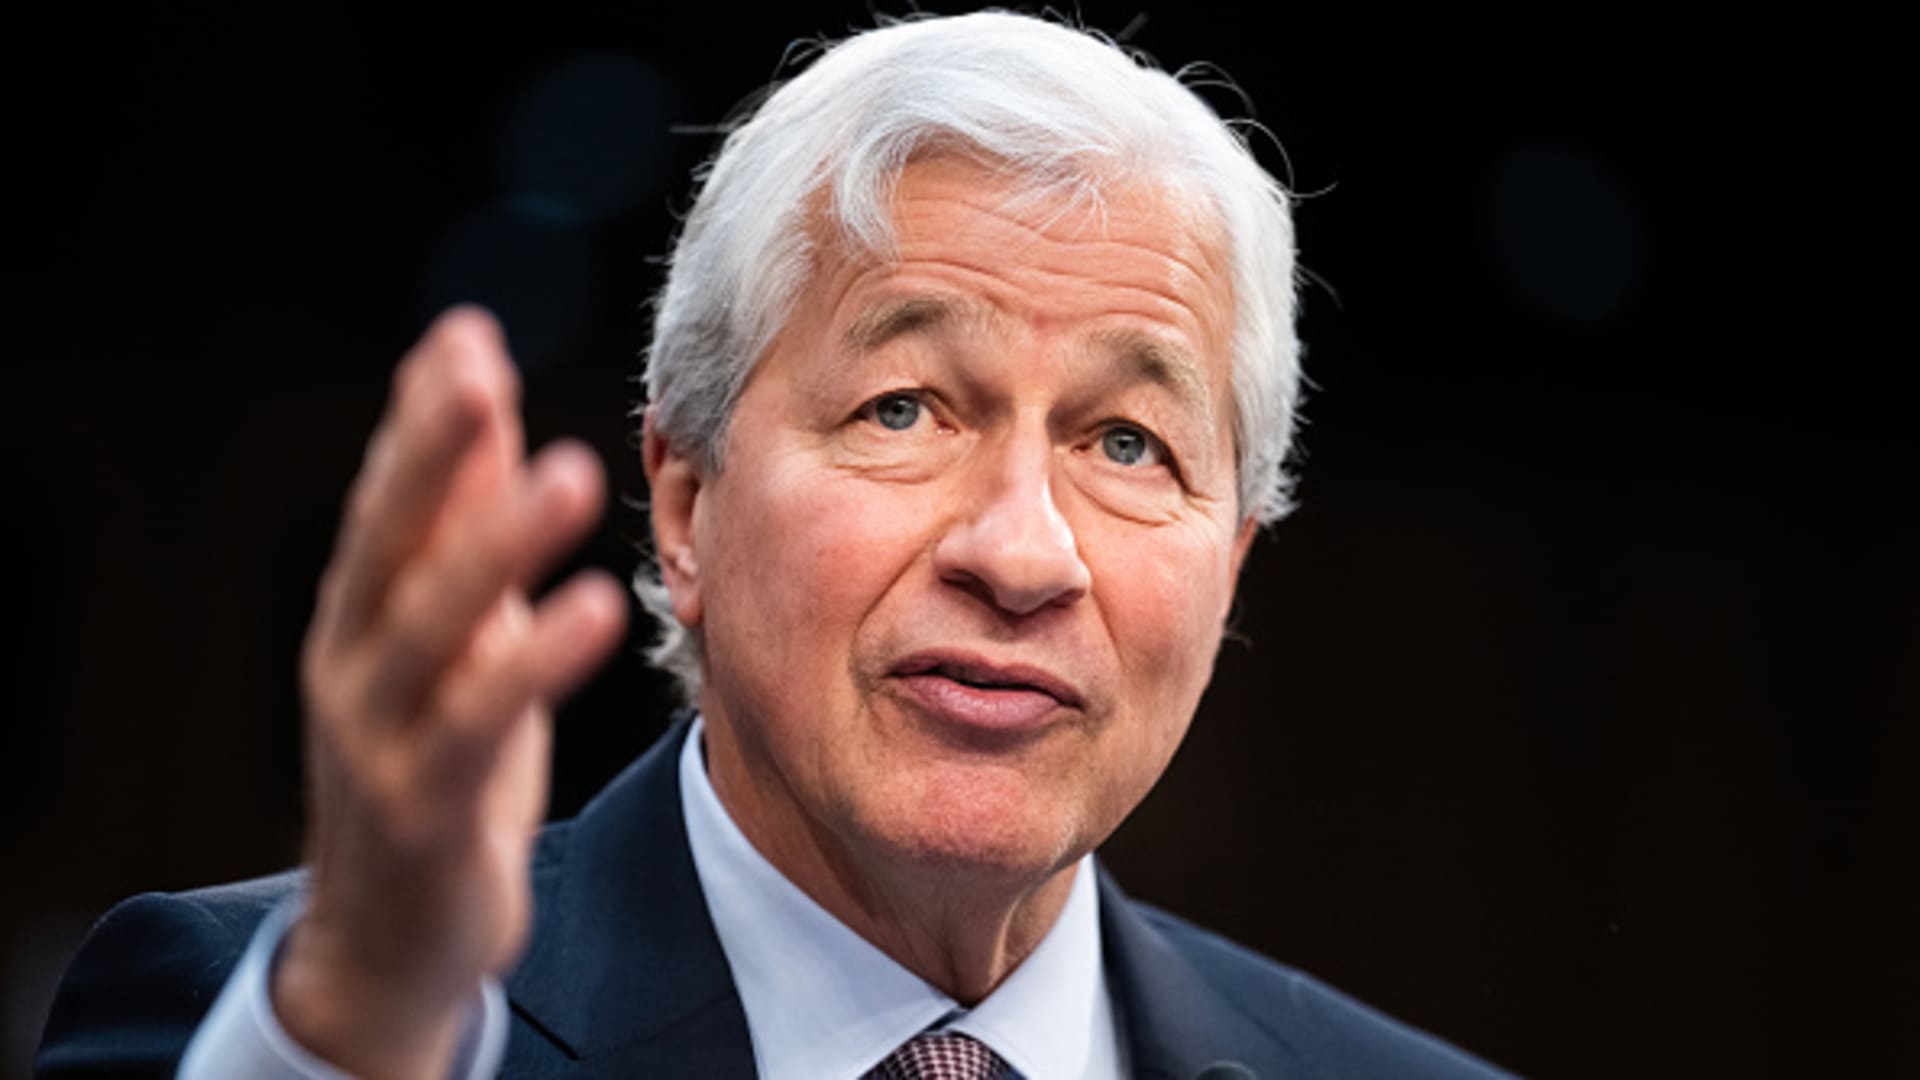 Jamie Dimon annual shareholder letter highlights AI potential